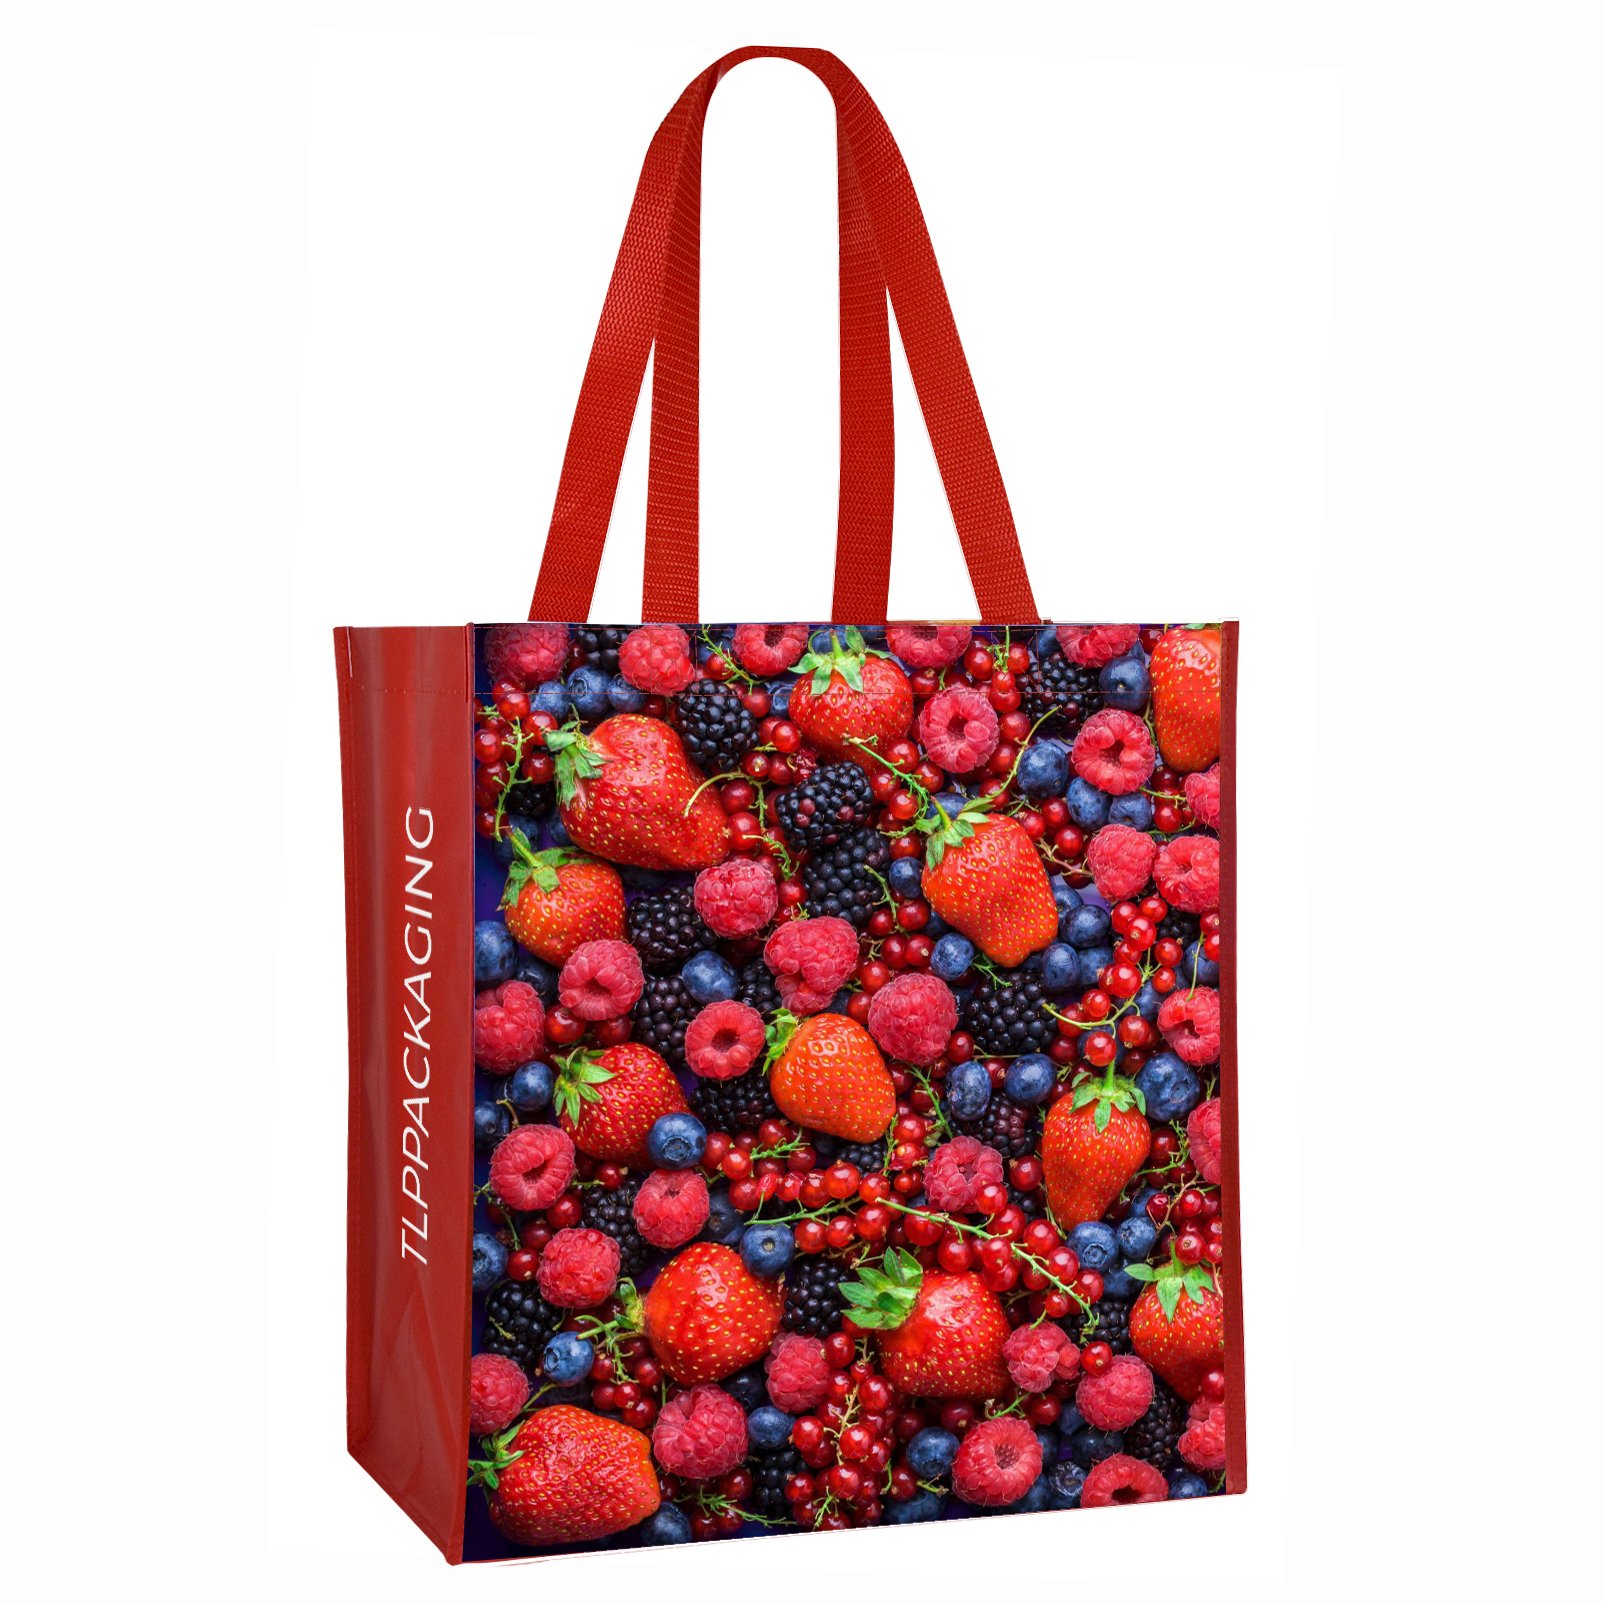 Laminated non-woven PP bag for shopping, giveaways